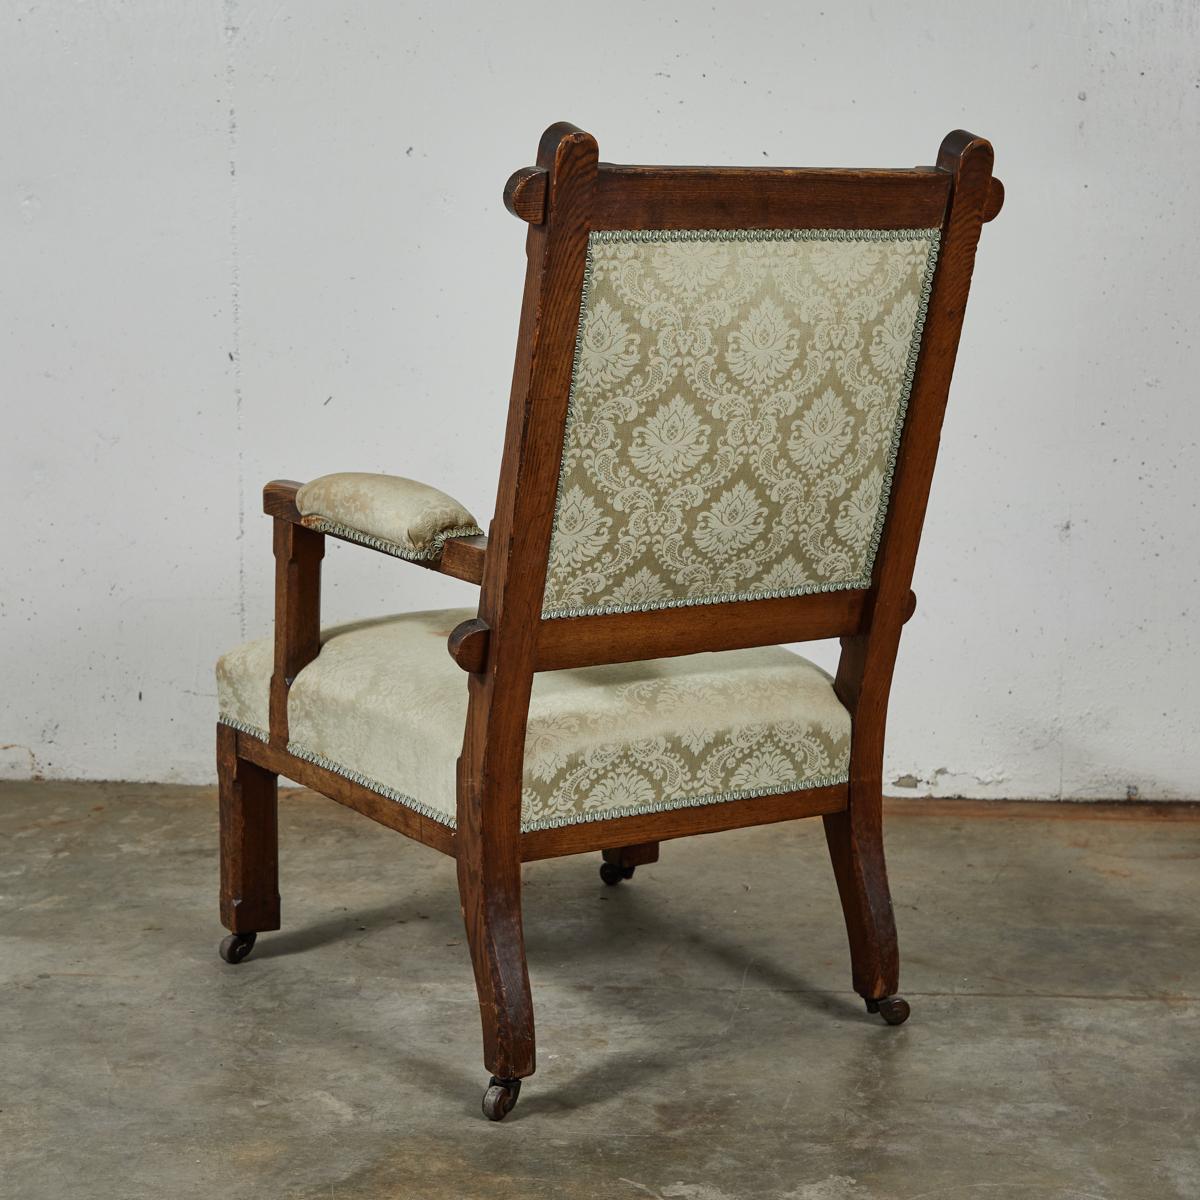 Early 20th Century English Arts & Crafts Oak Chair 2